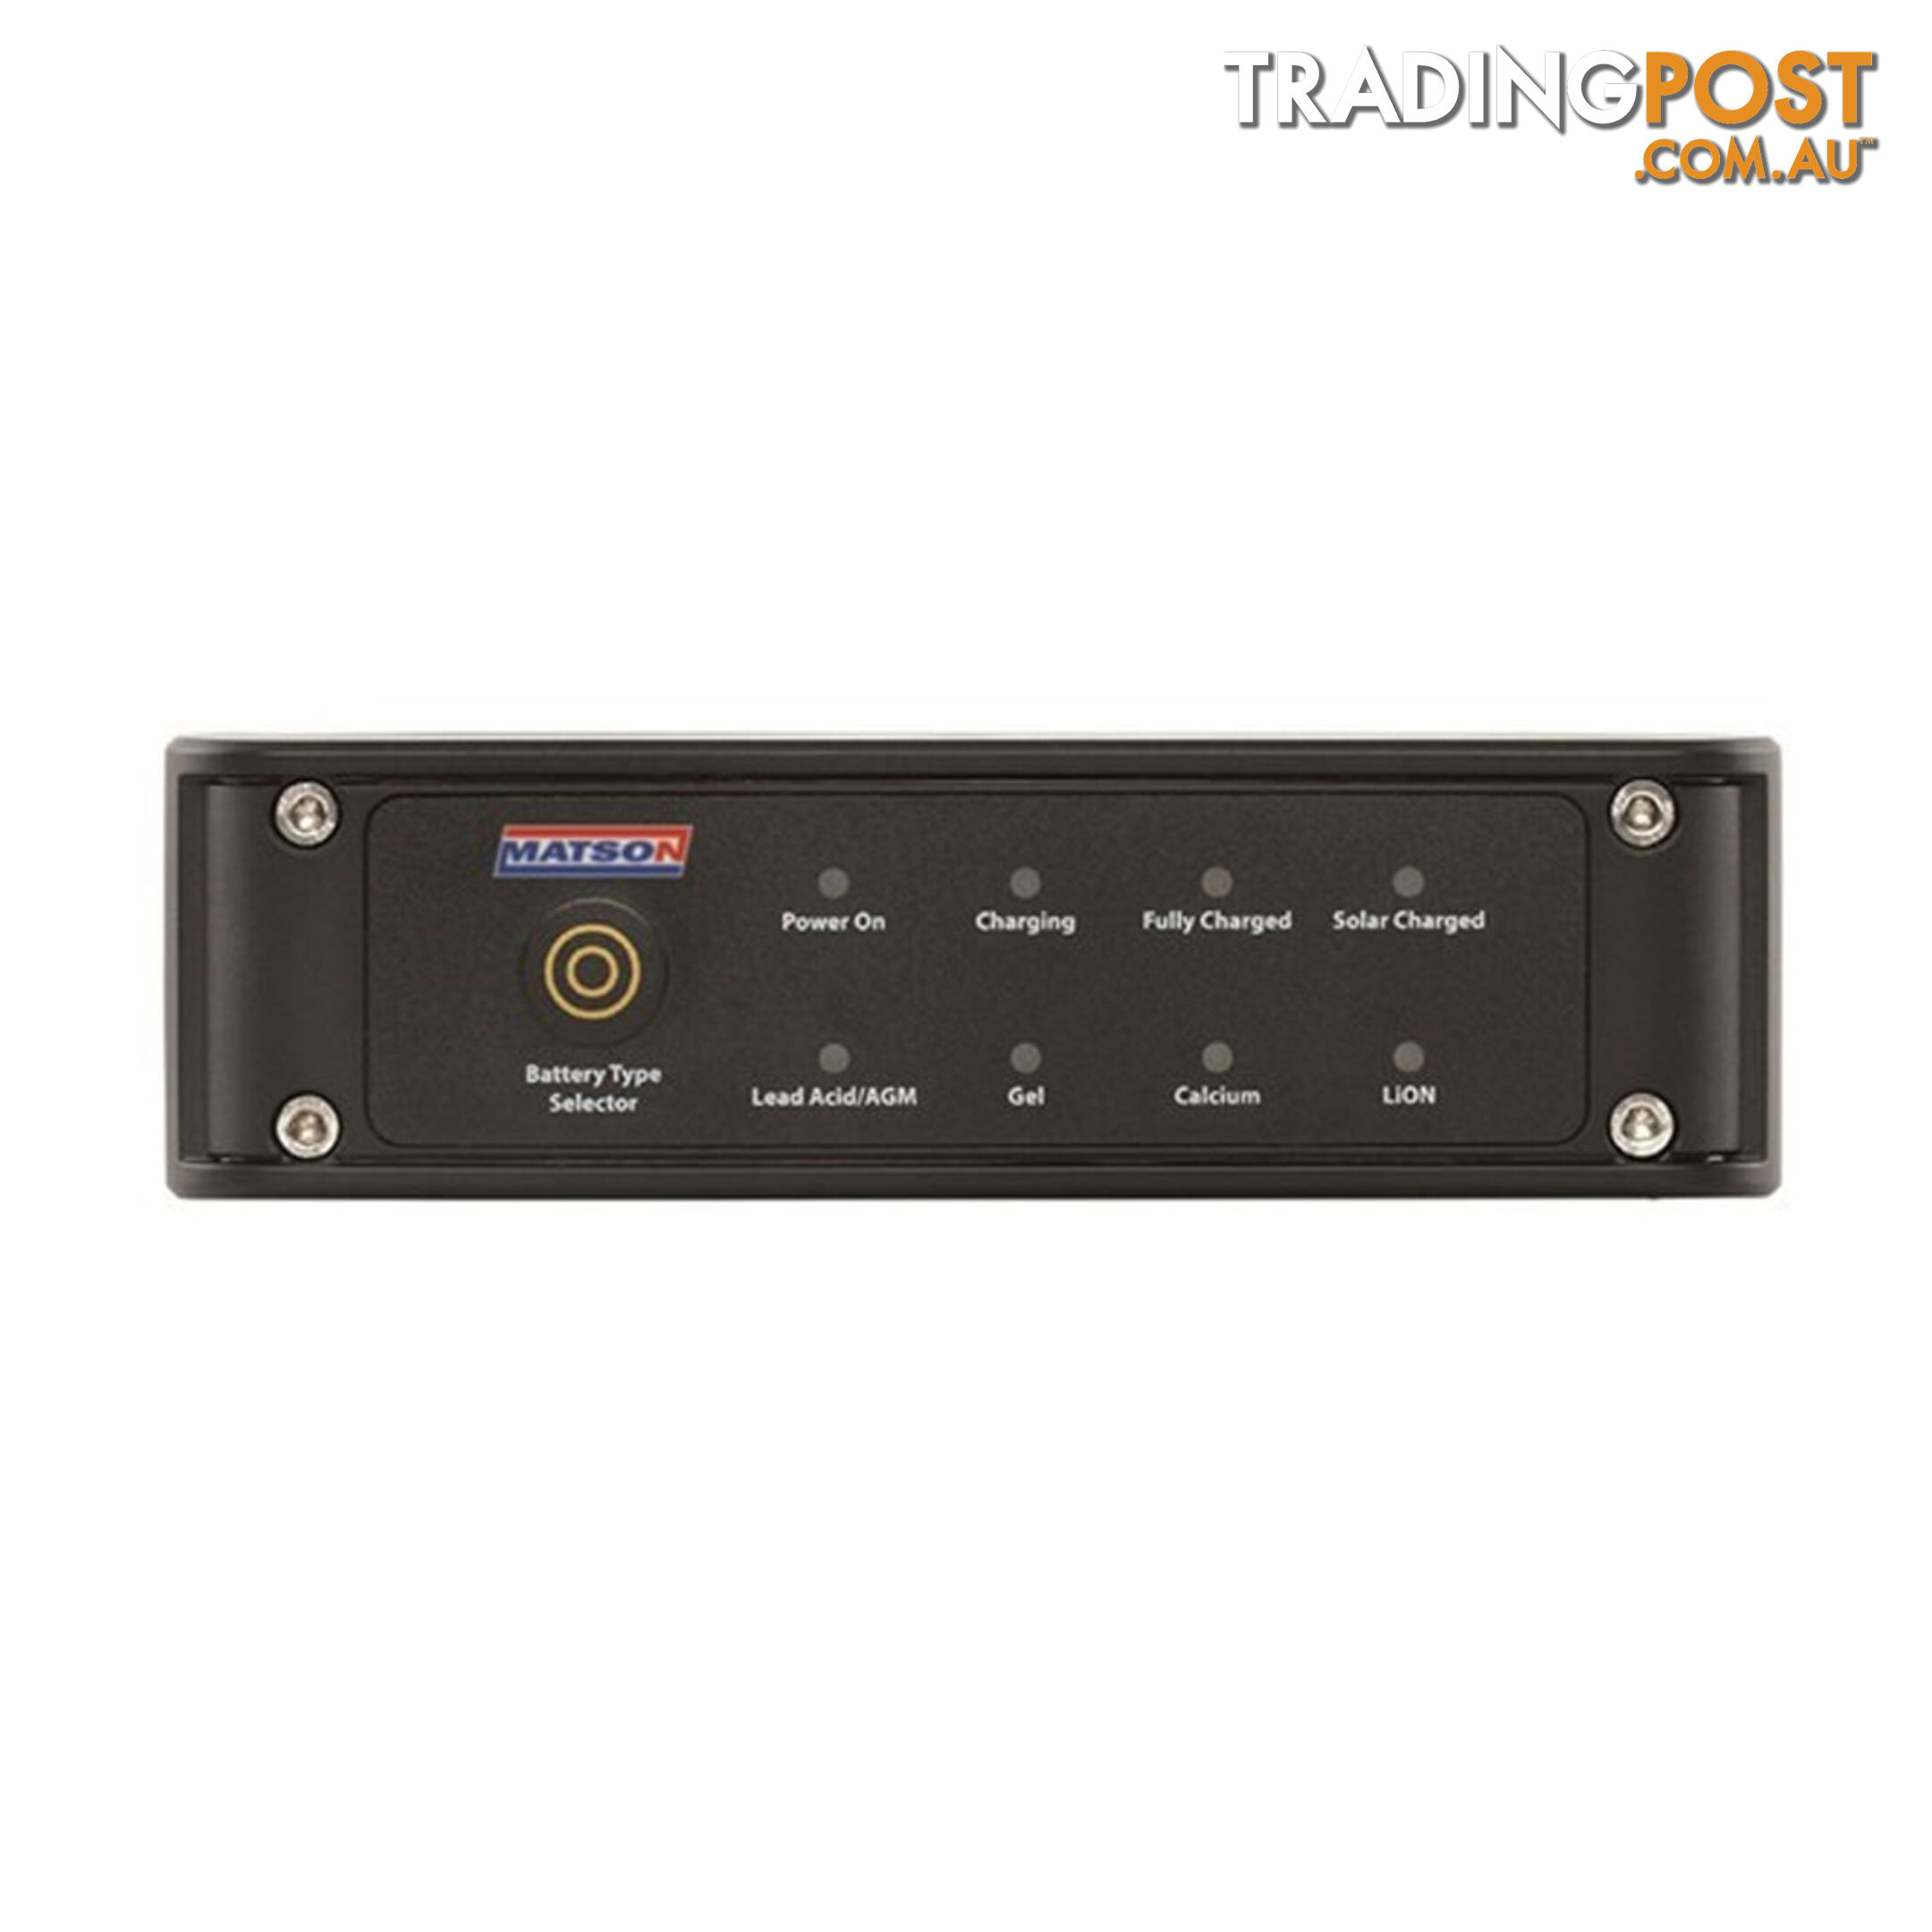 Matson Dc to DC 20 amp Charger with Solar MPPT LiFePO Capable SKU - MA21DCS